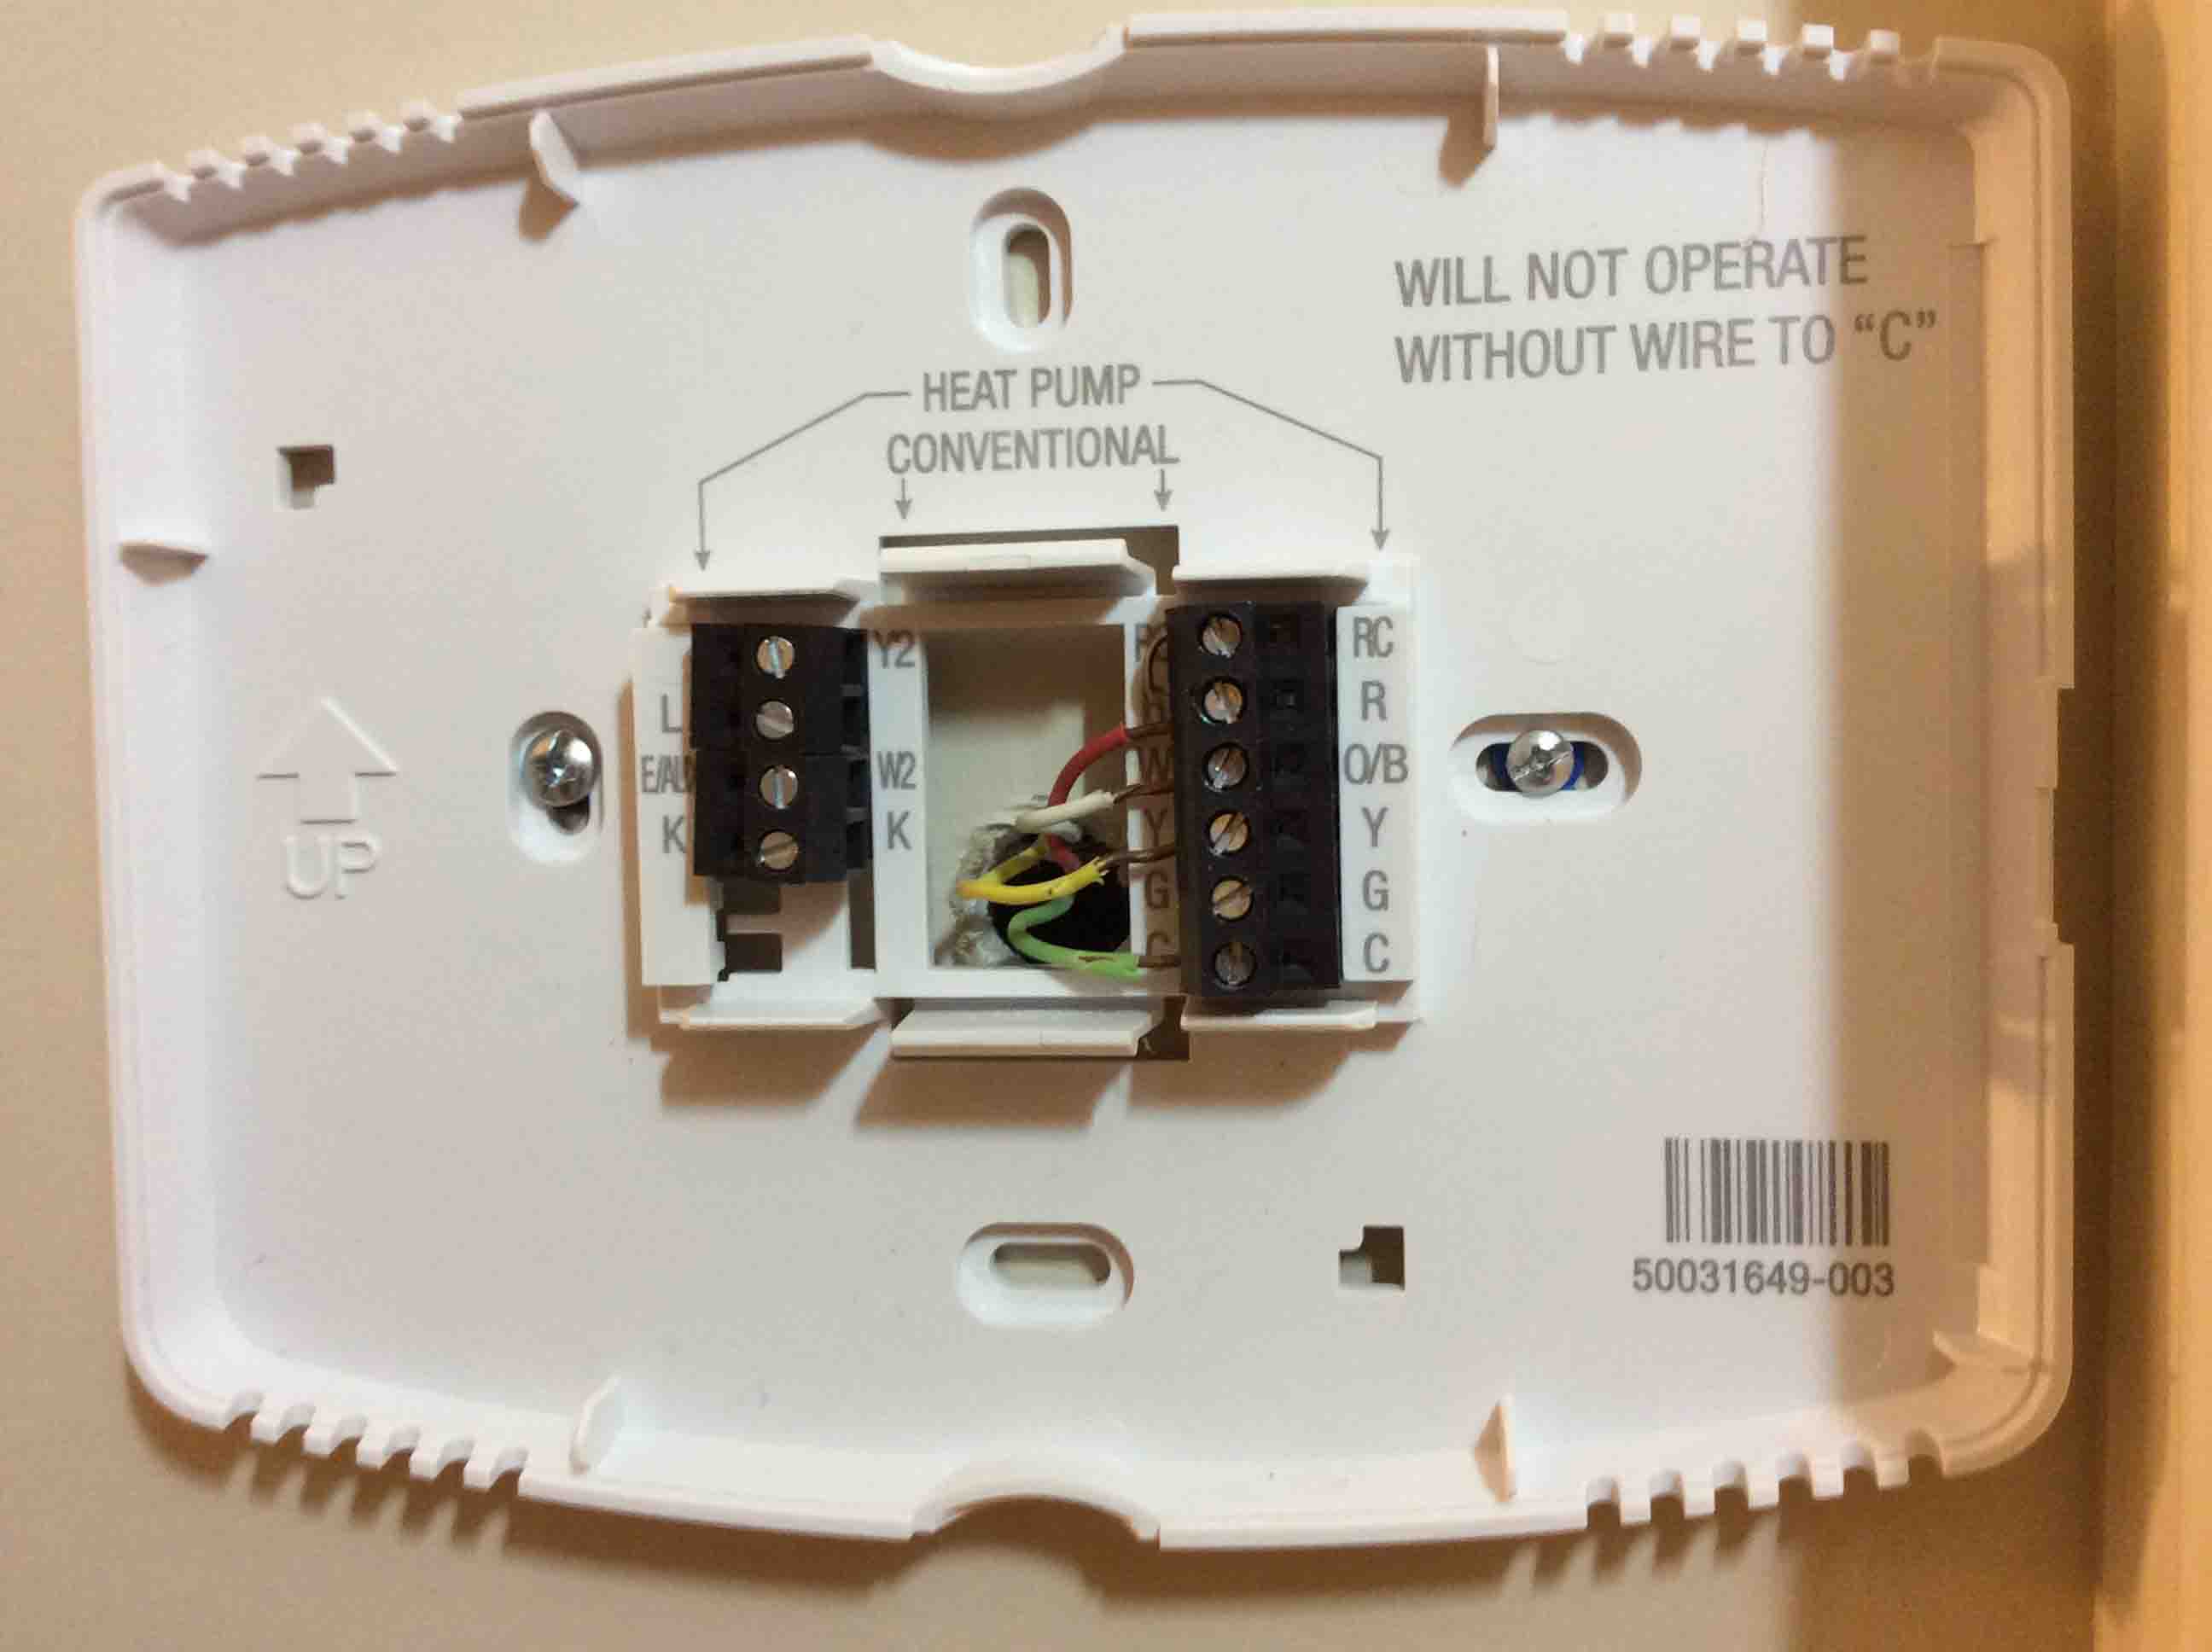 How To Wire Honeywell Smart Thermostat